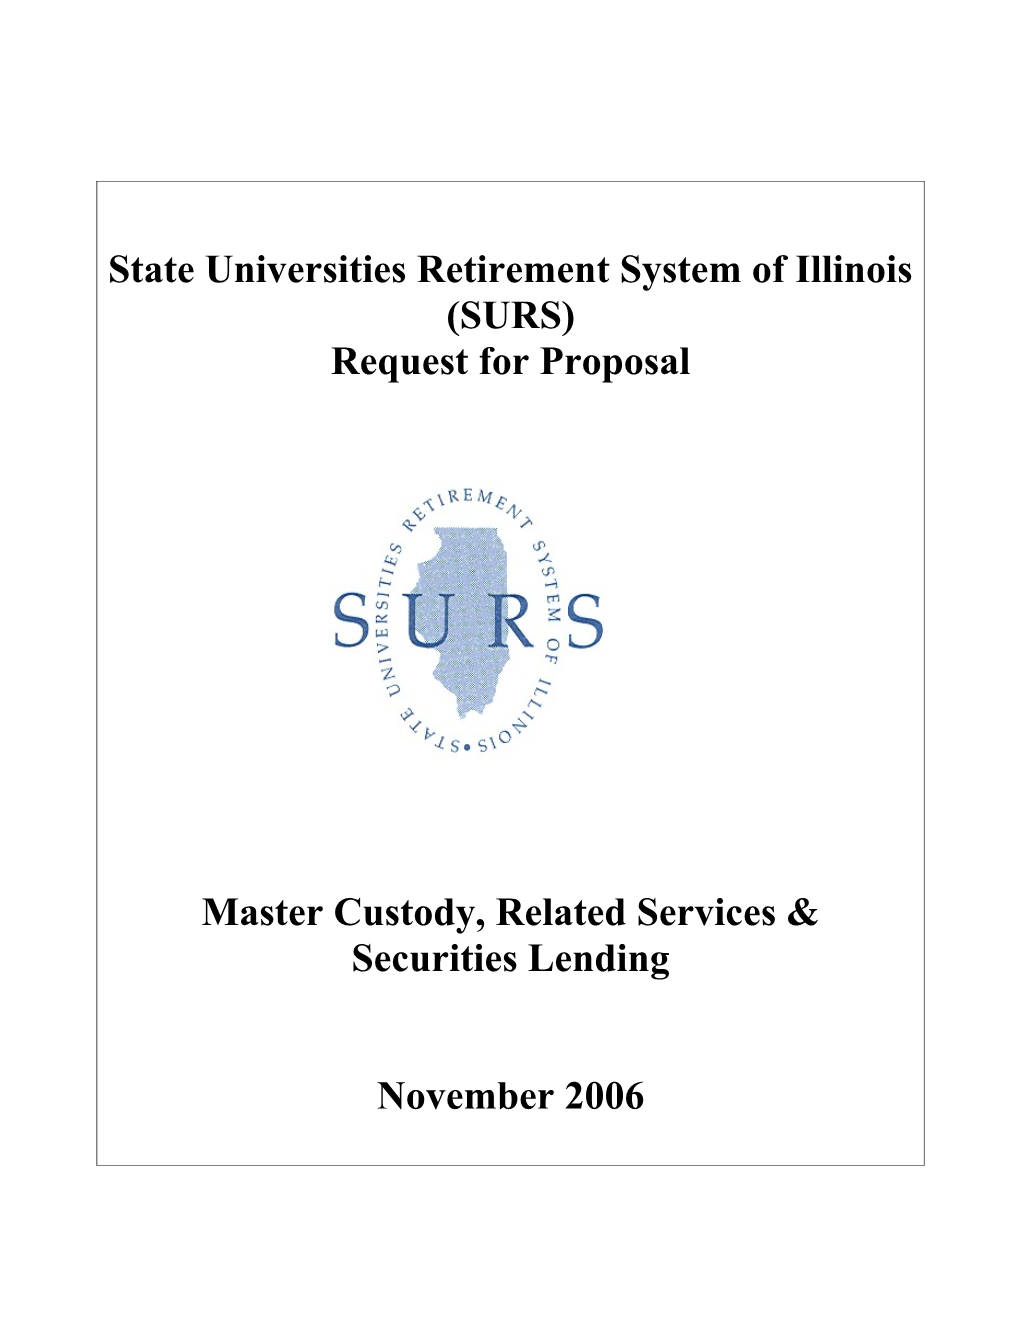 State Universities Retirement System of Illinois s1